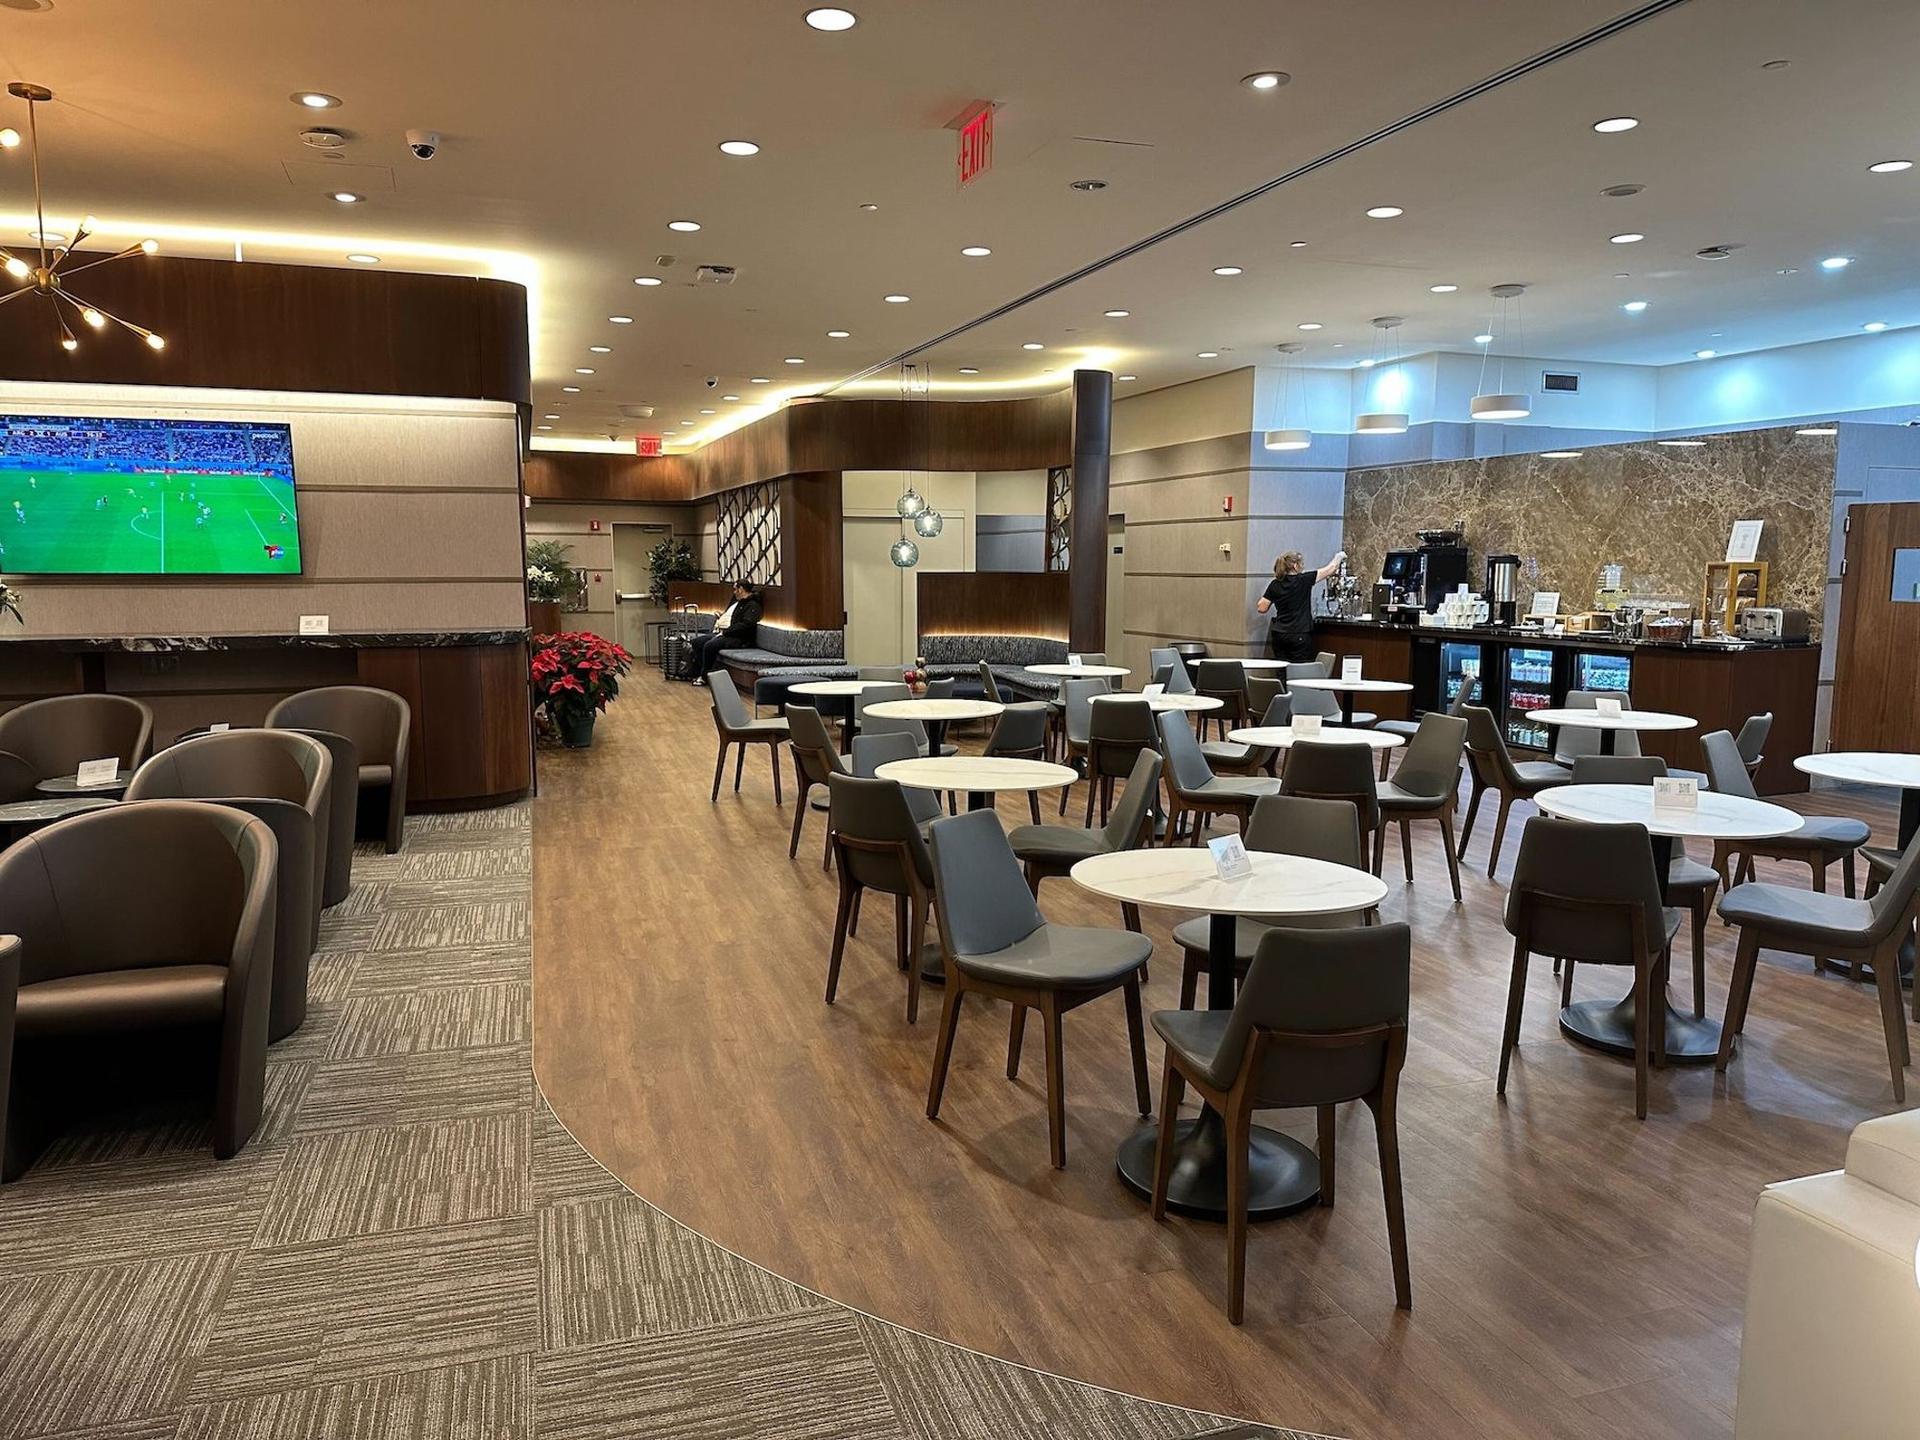 Turkish Airlines Lounge New York image 5 of 18